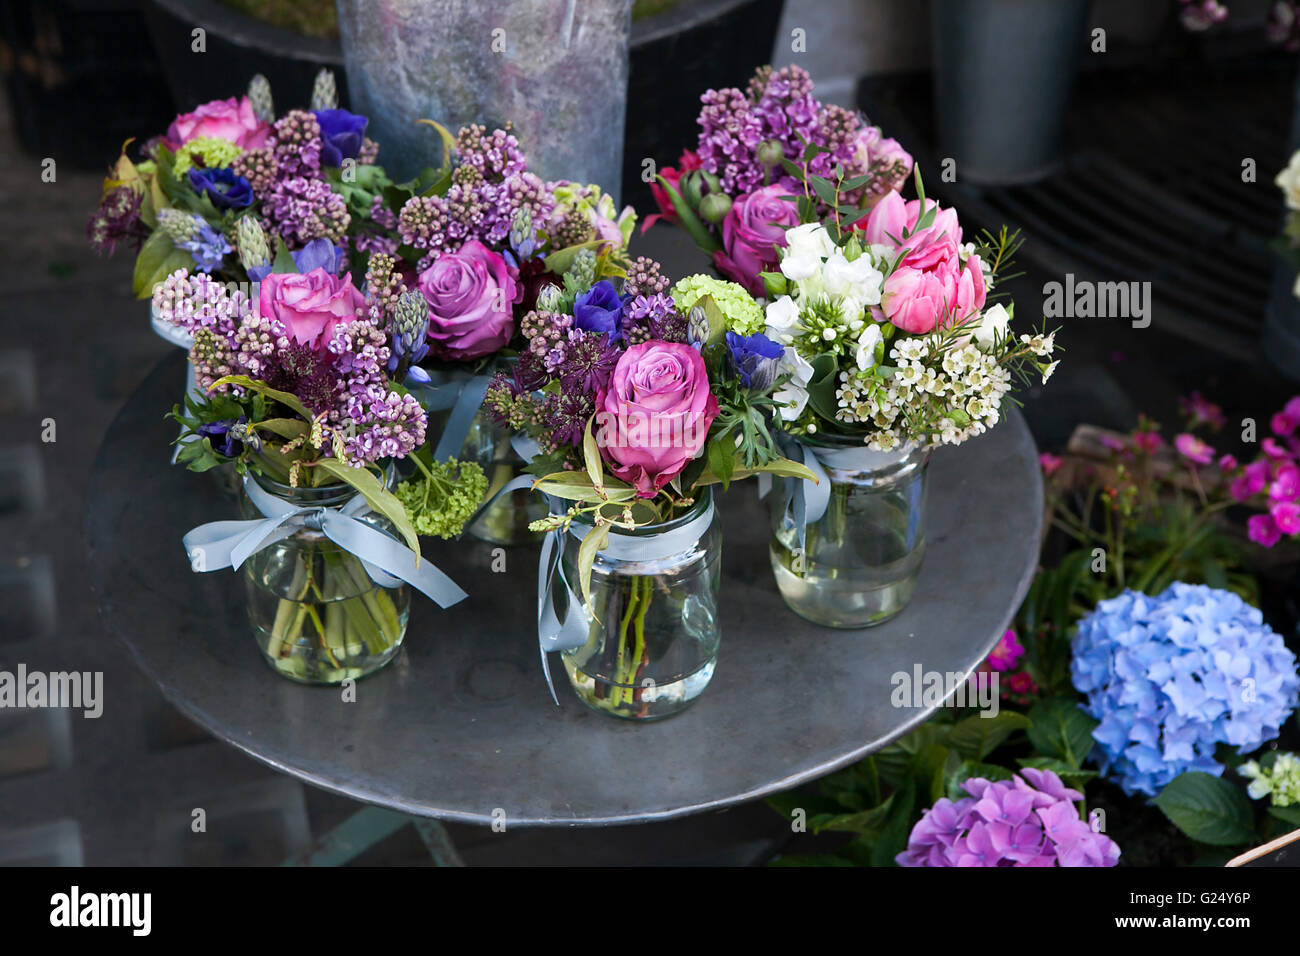 Small bouquets of lilacs, hyacinths, anemones, roses and peonies in small glass jars on an iron table. Stock Photo